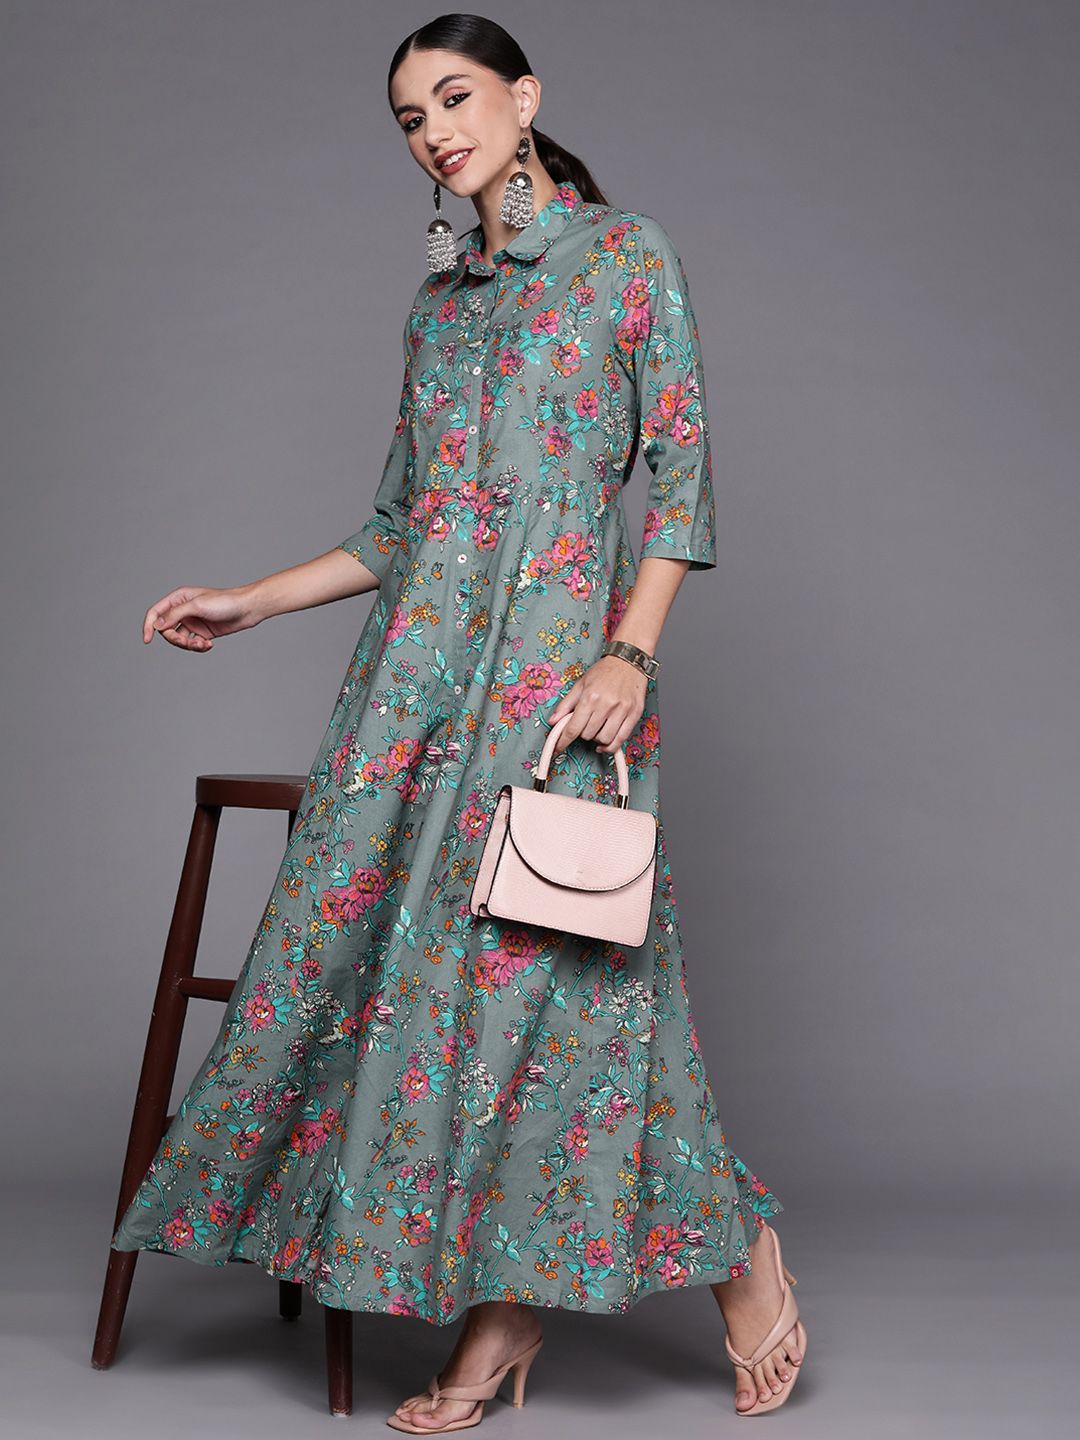 Biba Grey & Pink Pure Cotton Floral Printed Shirt Style Maxi Dress Price in India